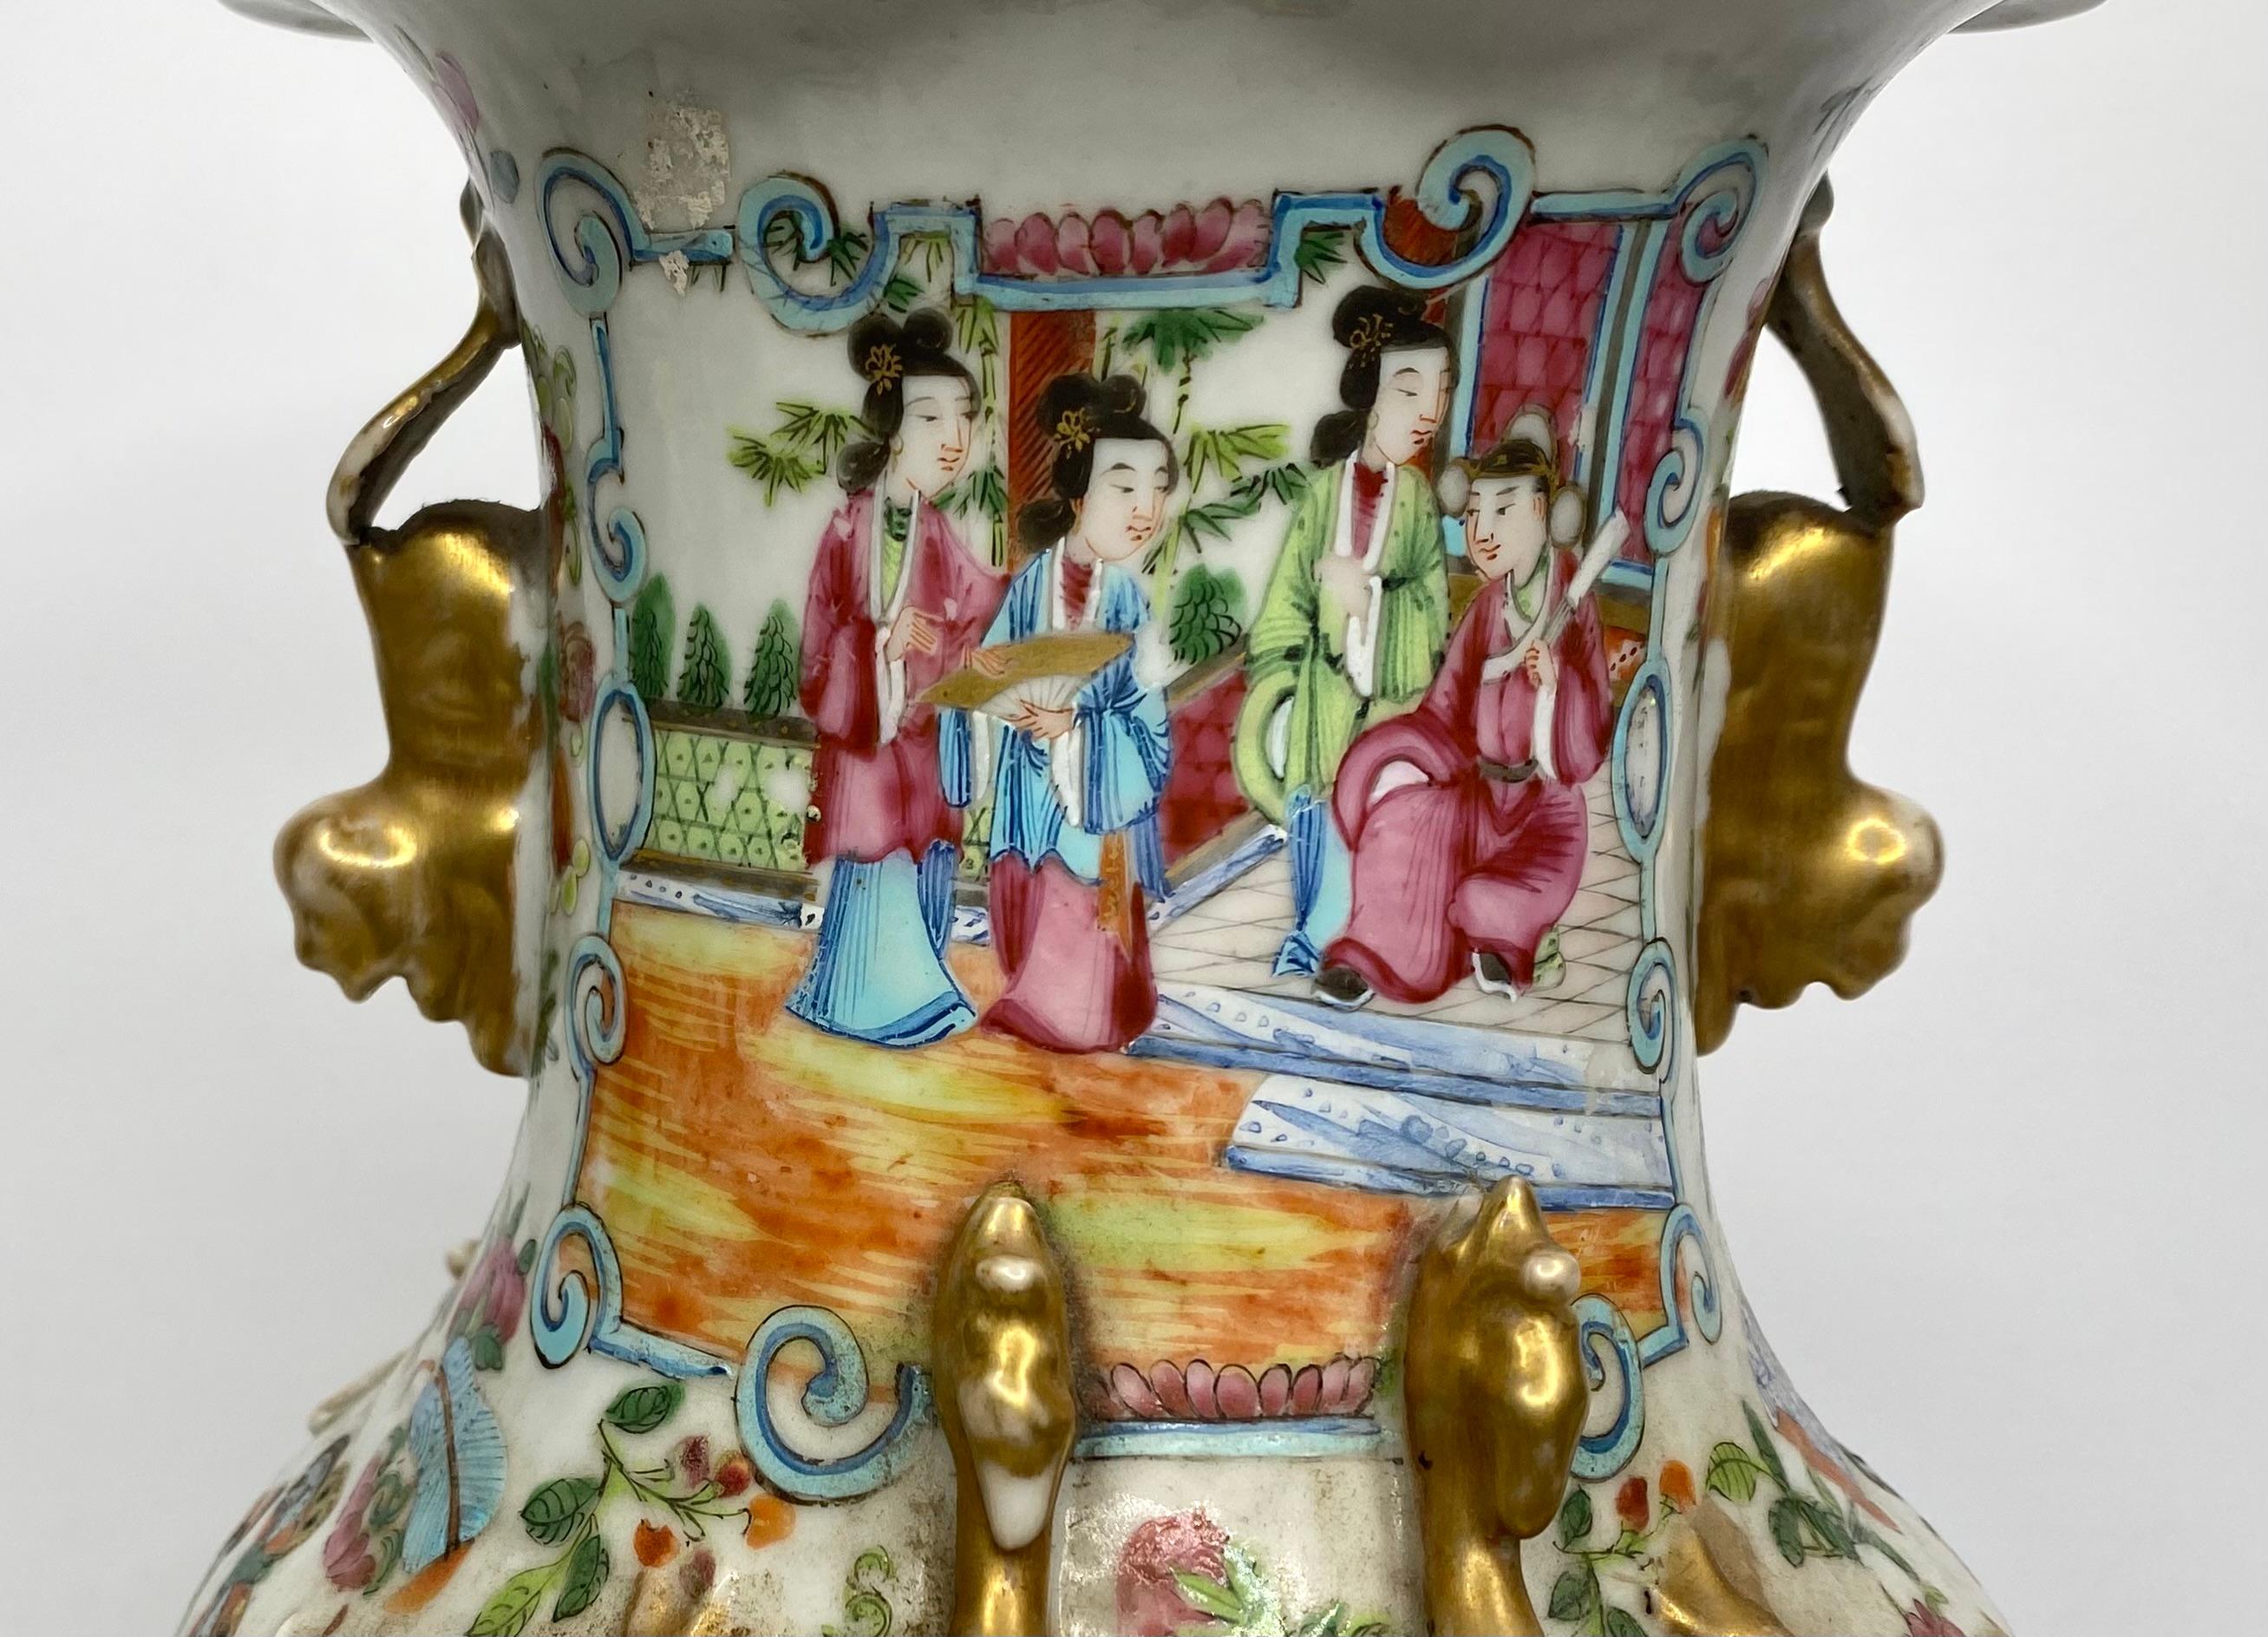 Late 19th Century Chinese Cantonese porcelain vase, c. 1870. Qing Dynasty.